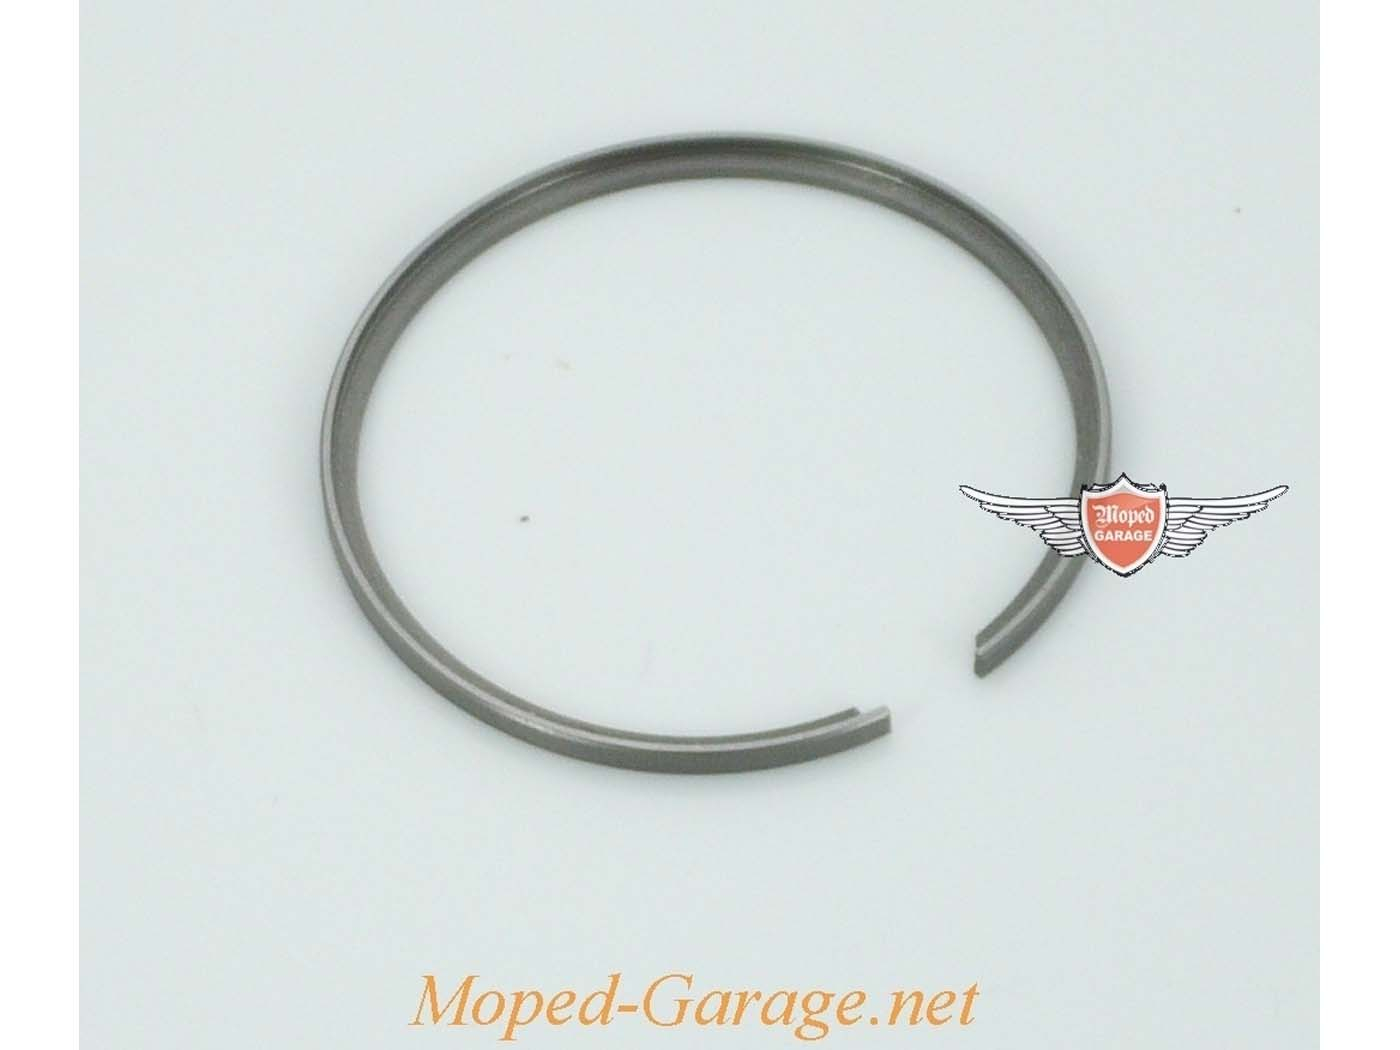 60cc Tuning Cylinder L-piston Ring For Hercules K 50 Sachs 50 S